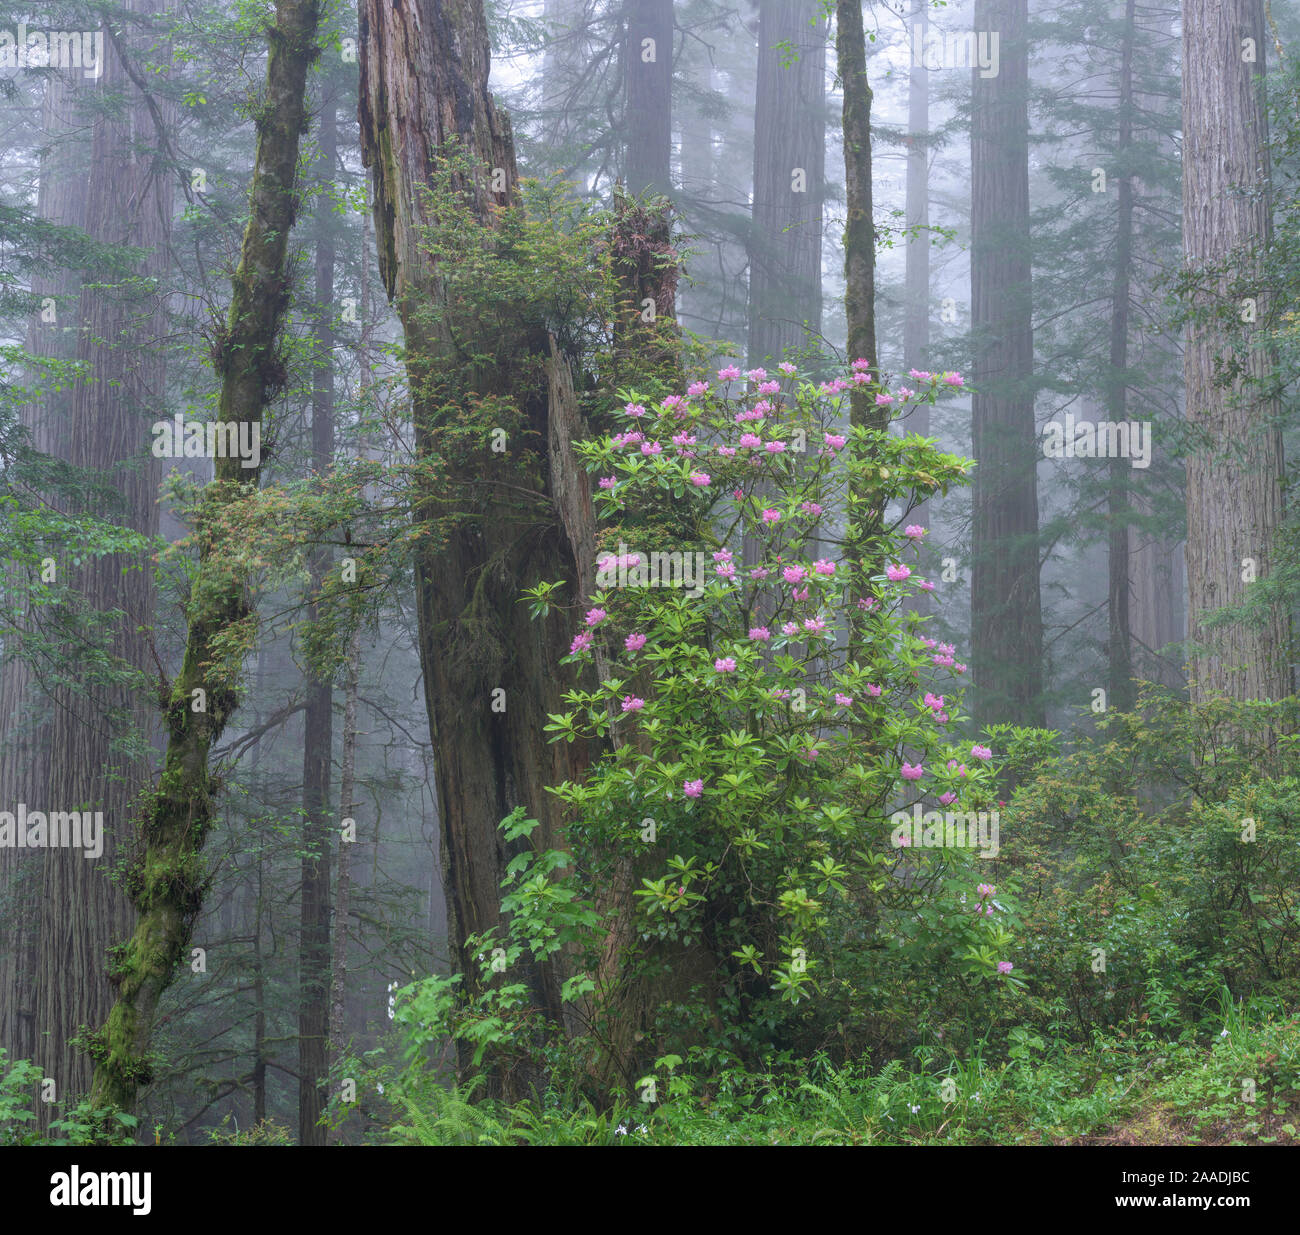 Flowering Rhododendron amongst giant old growth Redwood trees, Redwood National Park, Del Norte, California, USA. May 2017. Stock Photo